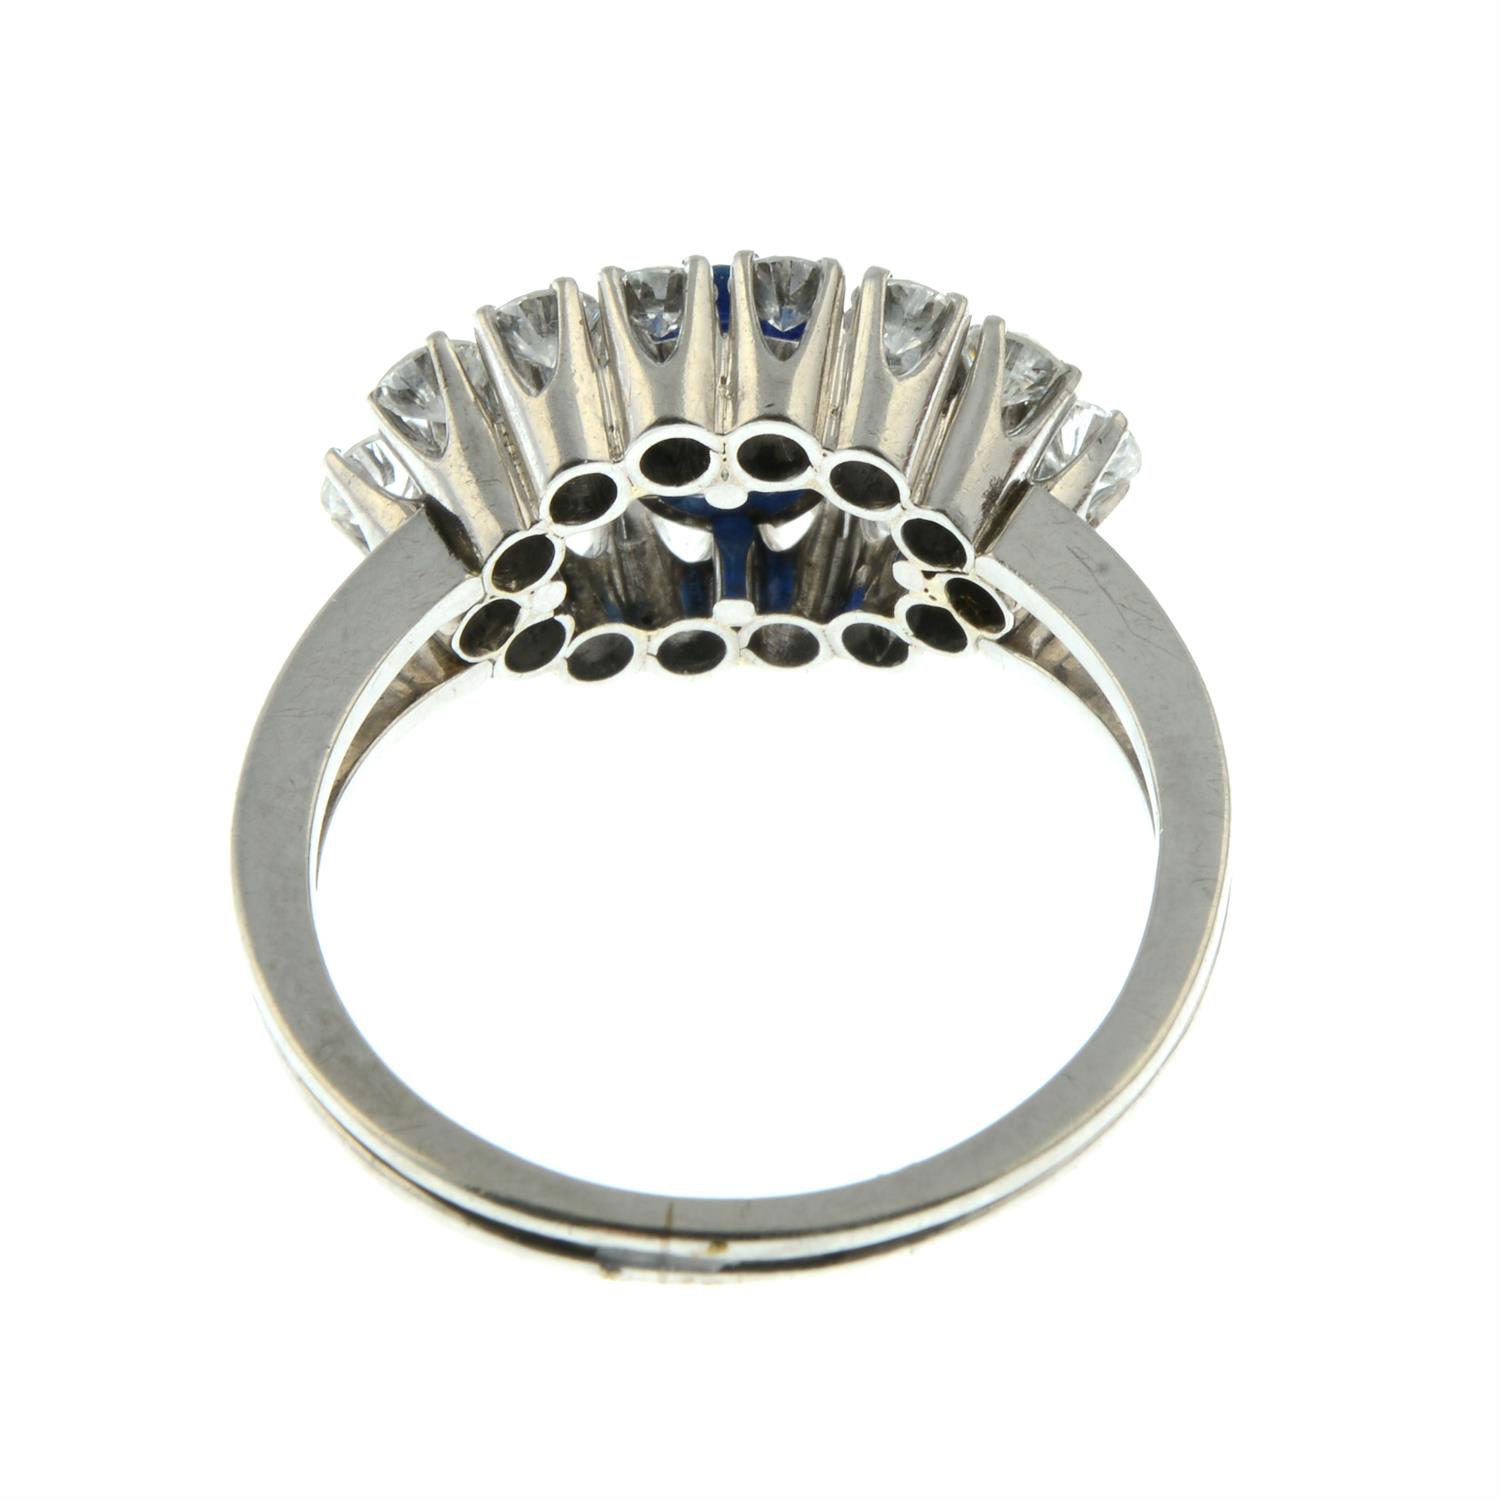 A Basaltic sapphire and brilliant-cut diamond dress ring. - Image 4 of 5